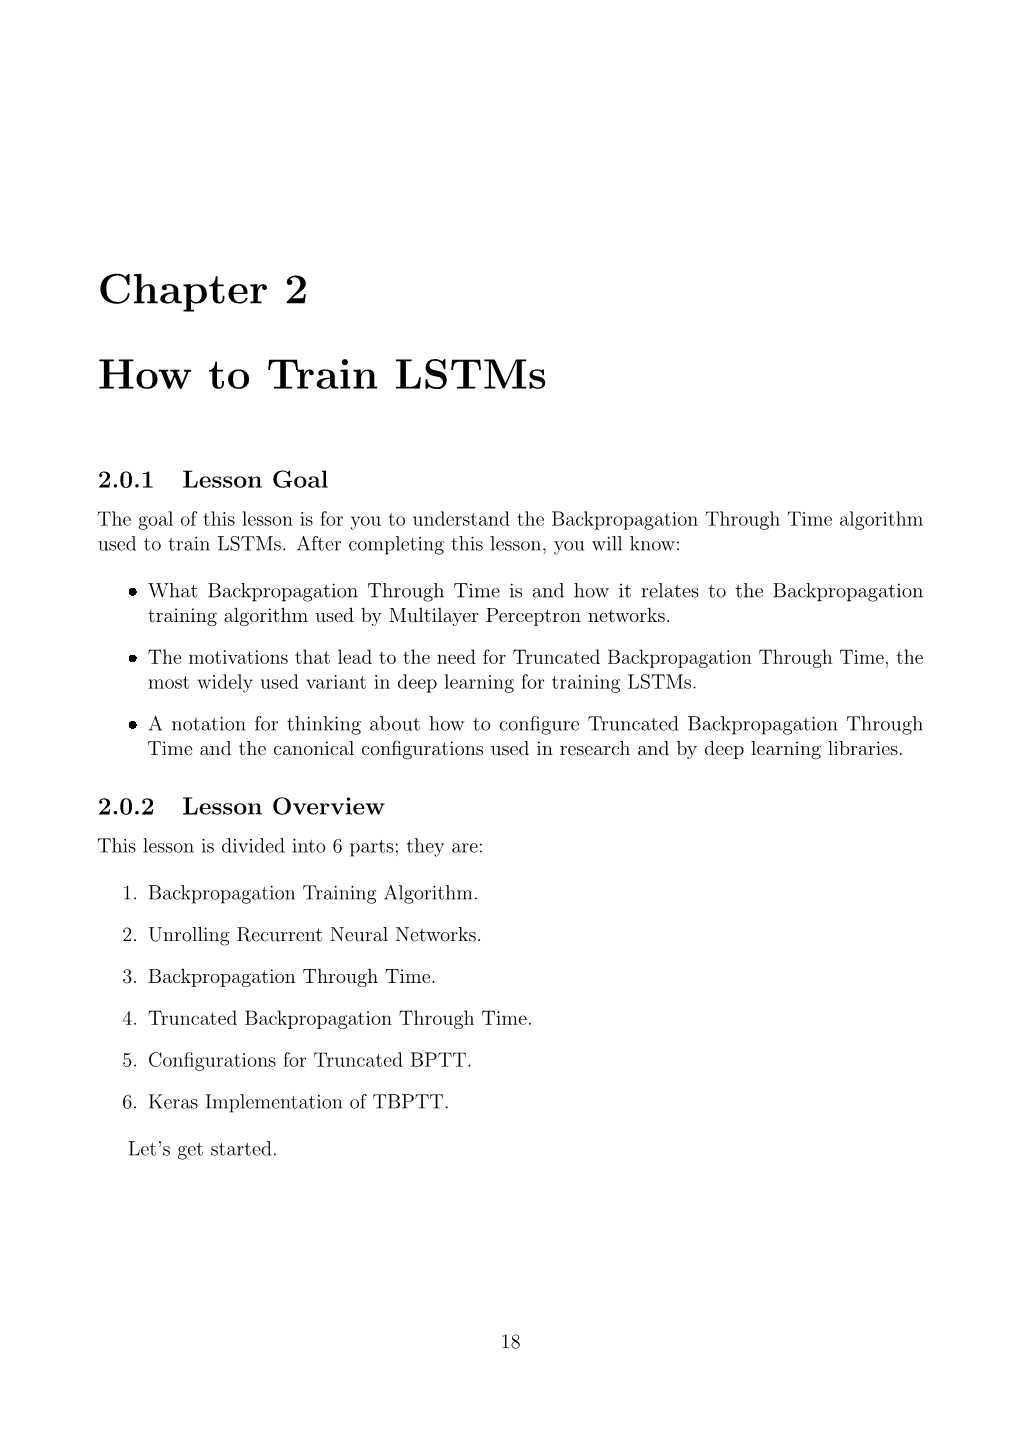 Chapter 2 How to Train Lstms